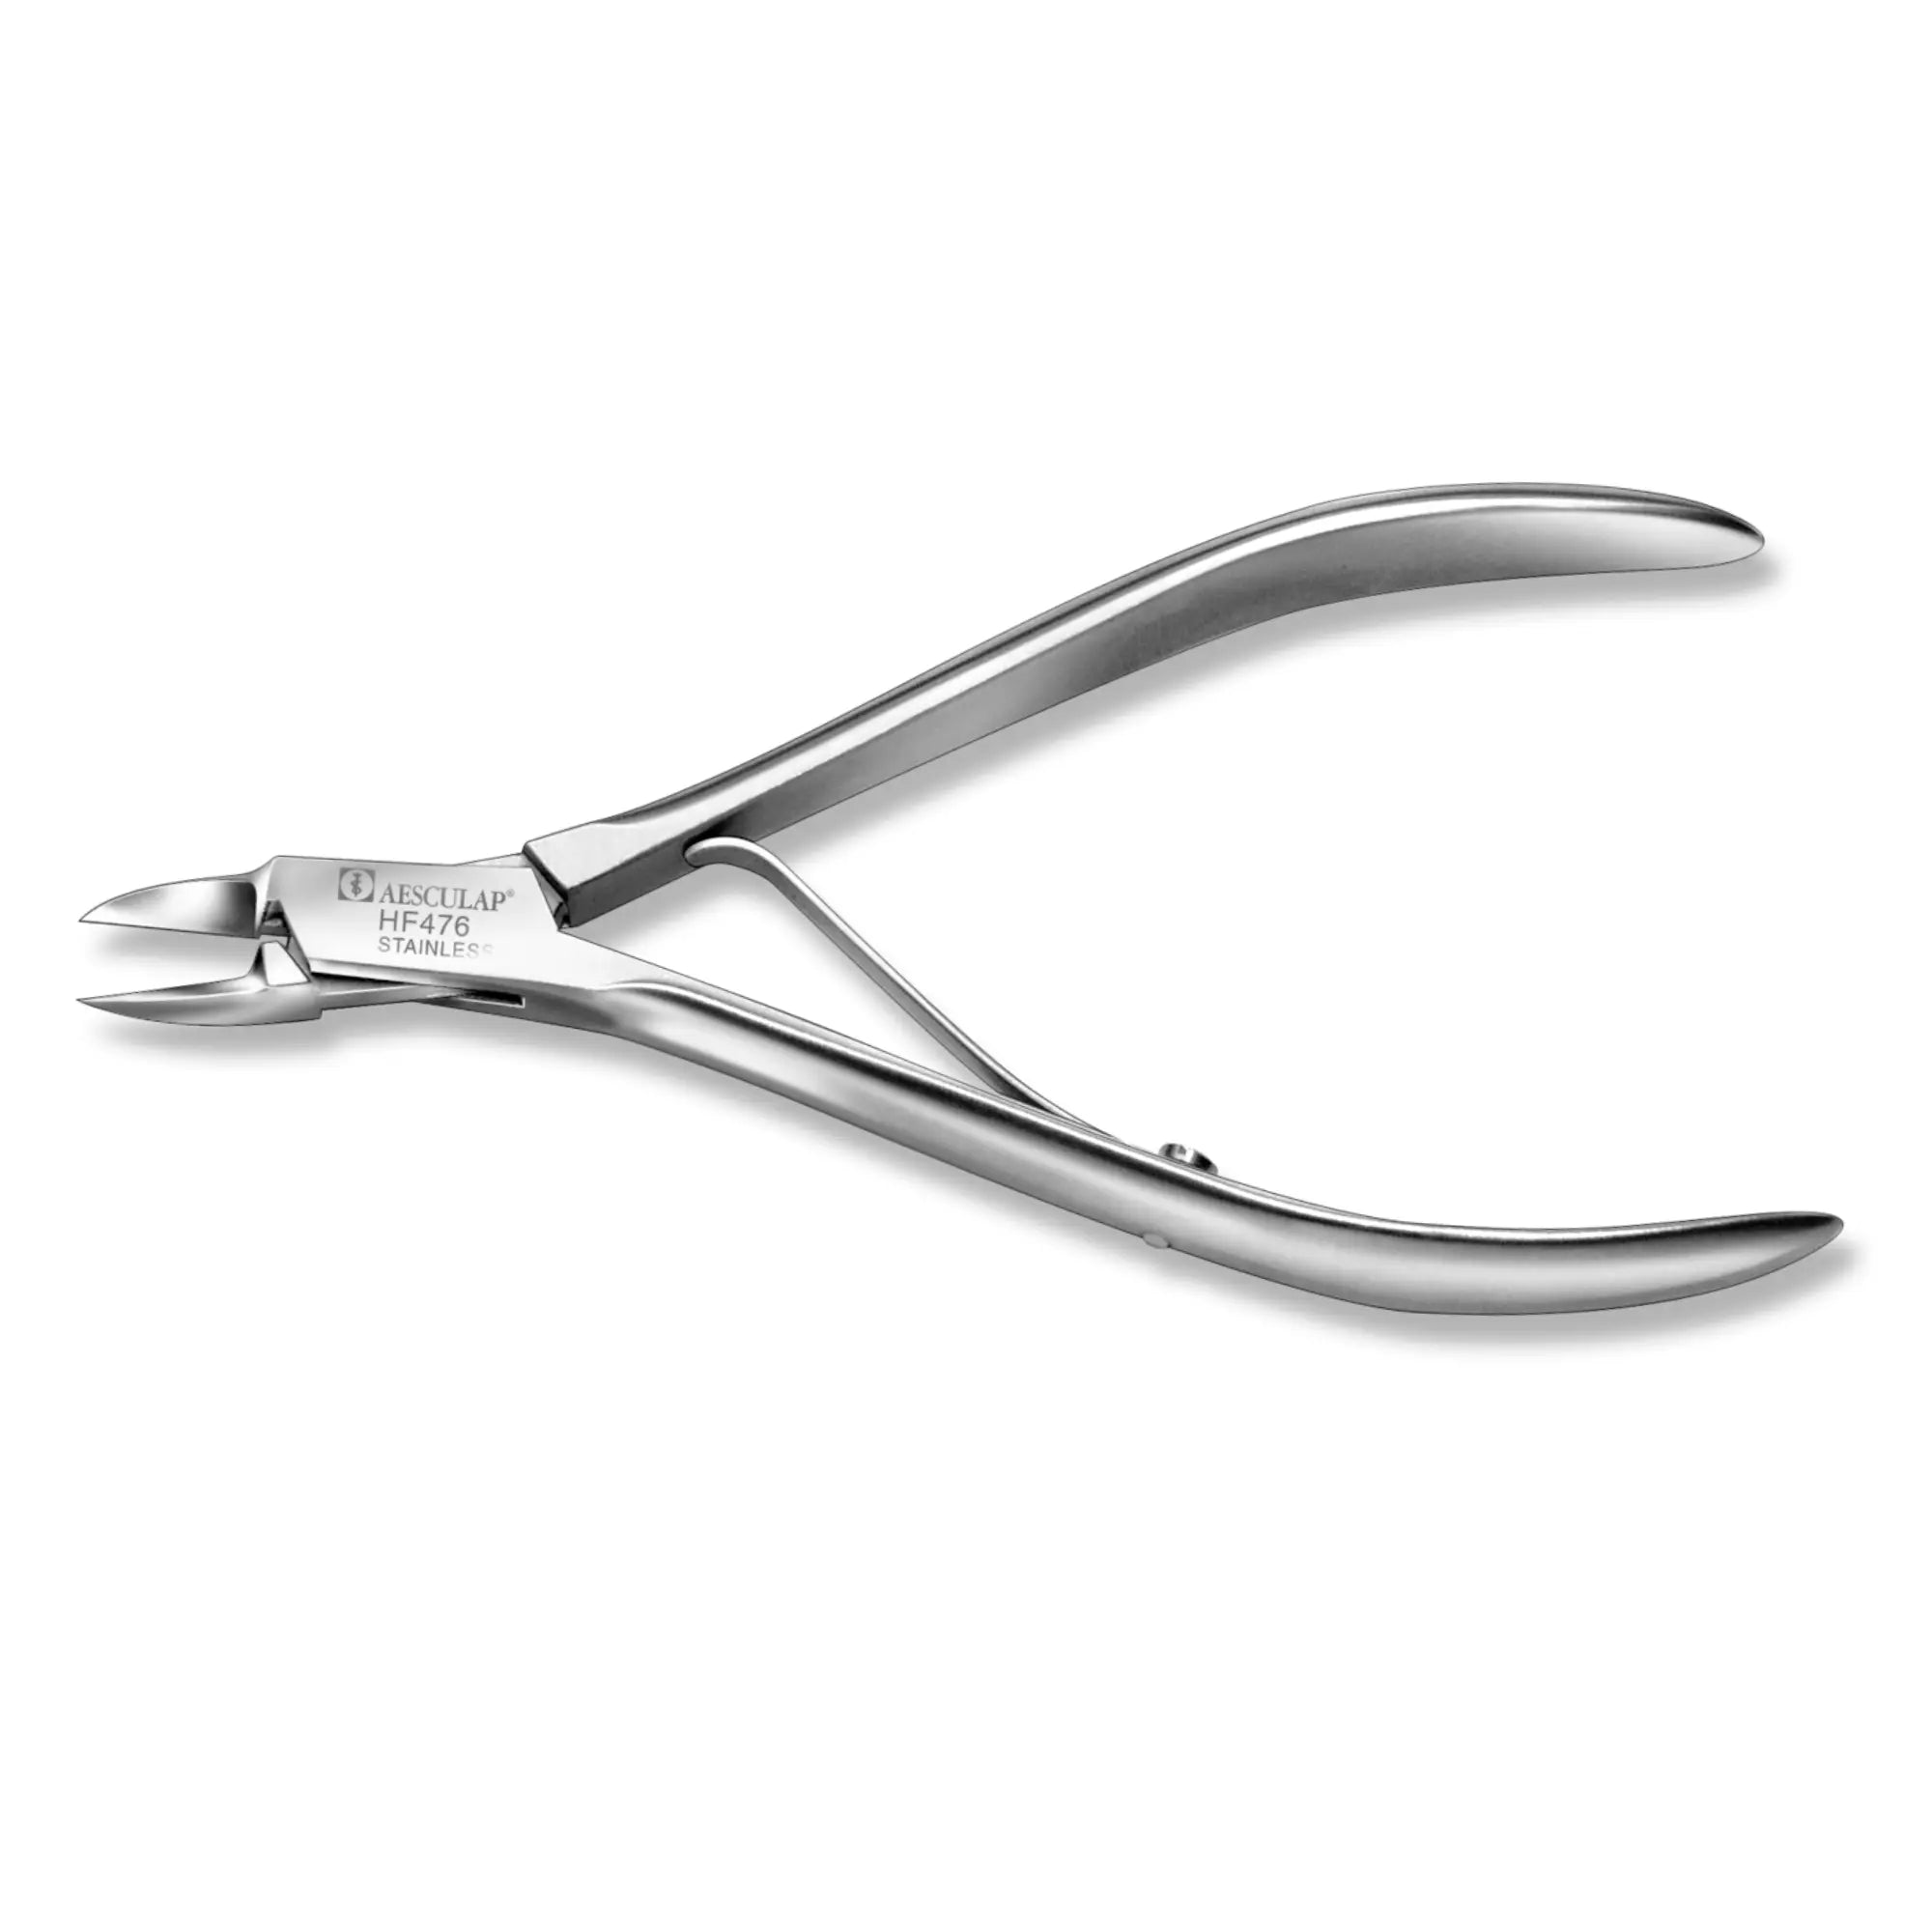 Pince à ongles - Coupe droite pointue - Mors plats - 11,5 cm - Aesculap - HF476 Aesculap